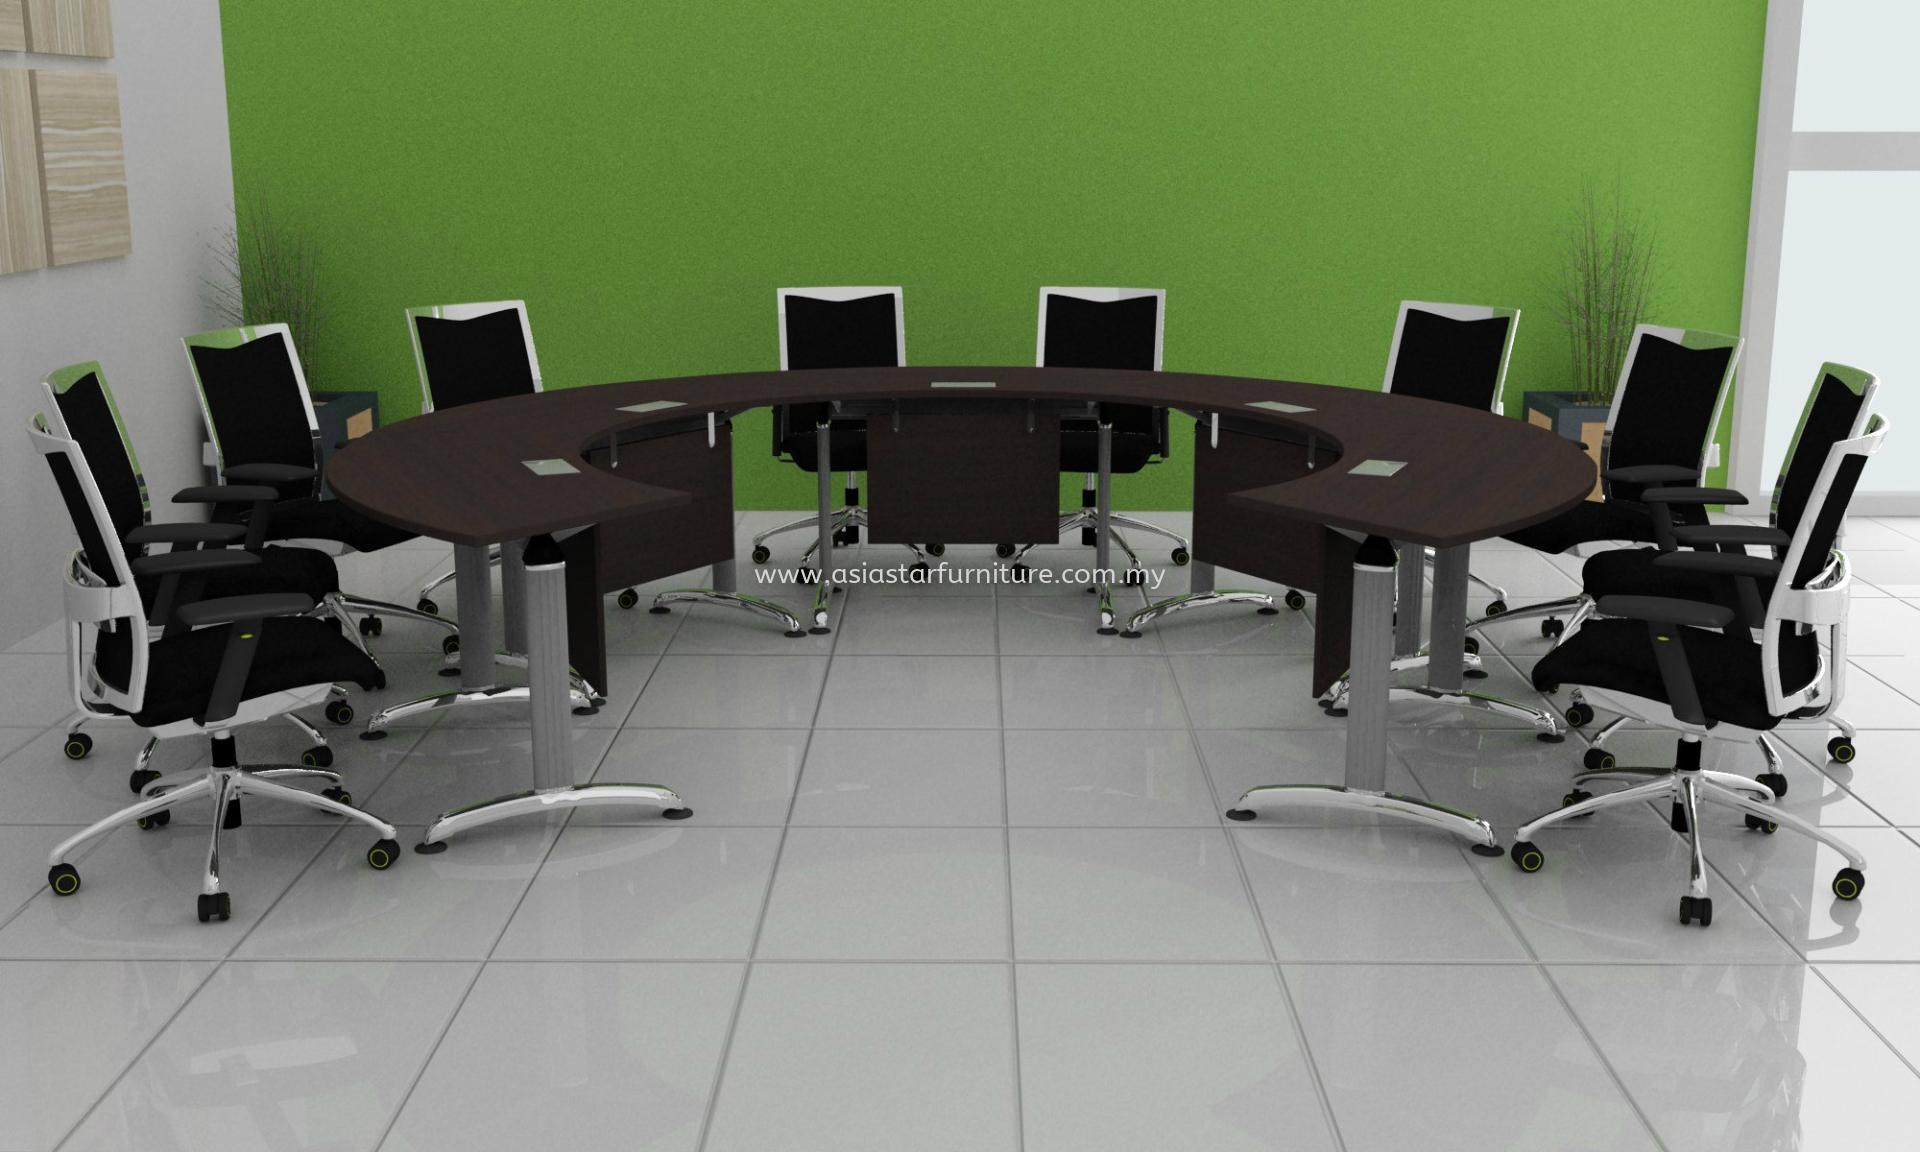 CONFERENCE MEETING TABLE 5 - Meeting Table Seri Kembangan | Meeting Table Gombak | Meeting Table Batu Caves | Meeting Table Kepong